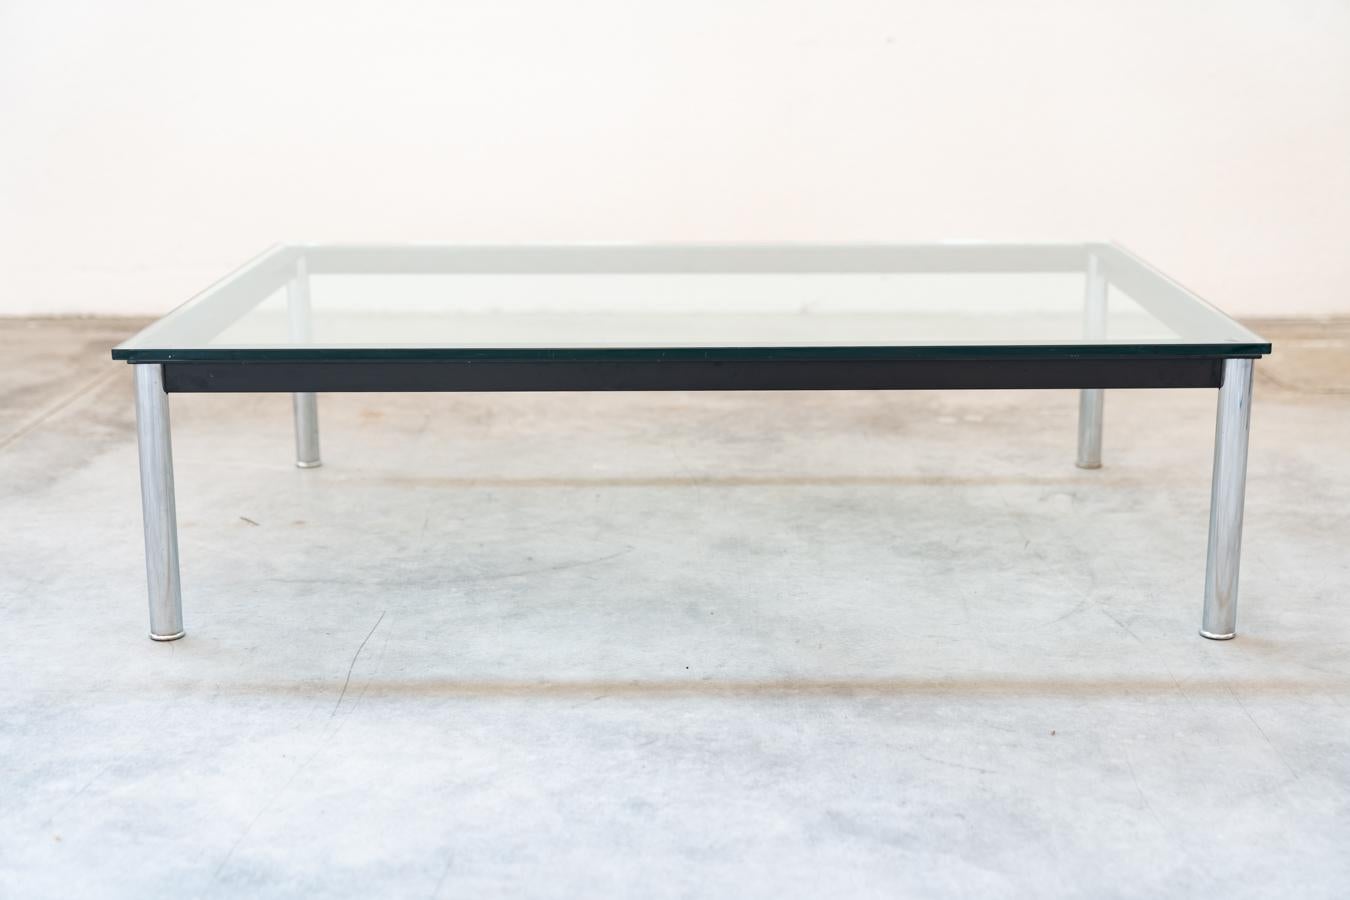 Cassina LCD 10 coffee table, by Le Corbusier, 1970/1980
LC10 low rectangular coffee table designed by LE CORBUSIER, PIERRE 	JANNERET and CHARLOTTE PERRIAND for CASSINA in chrome-plated steel and glass 	tempered. Polished trivalent chrome steel (CR3)